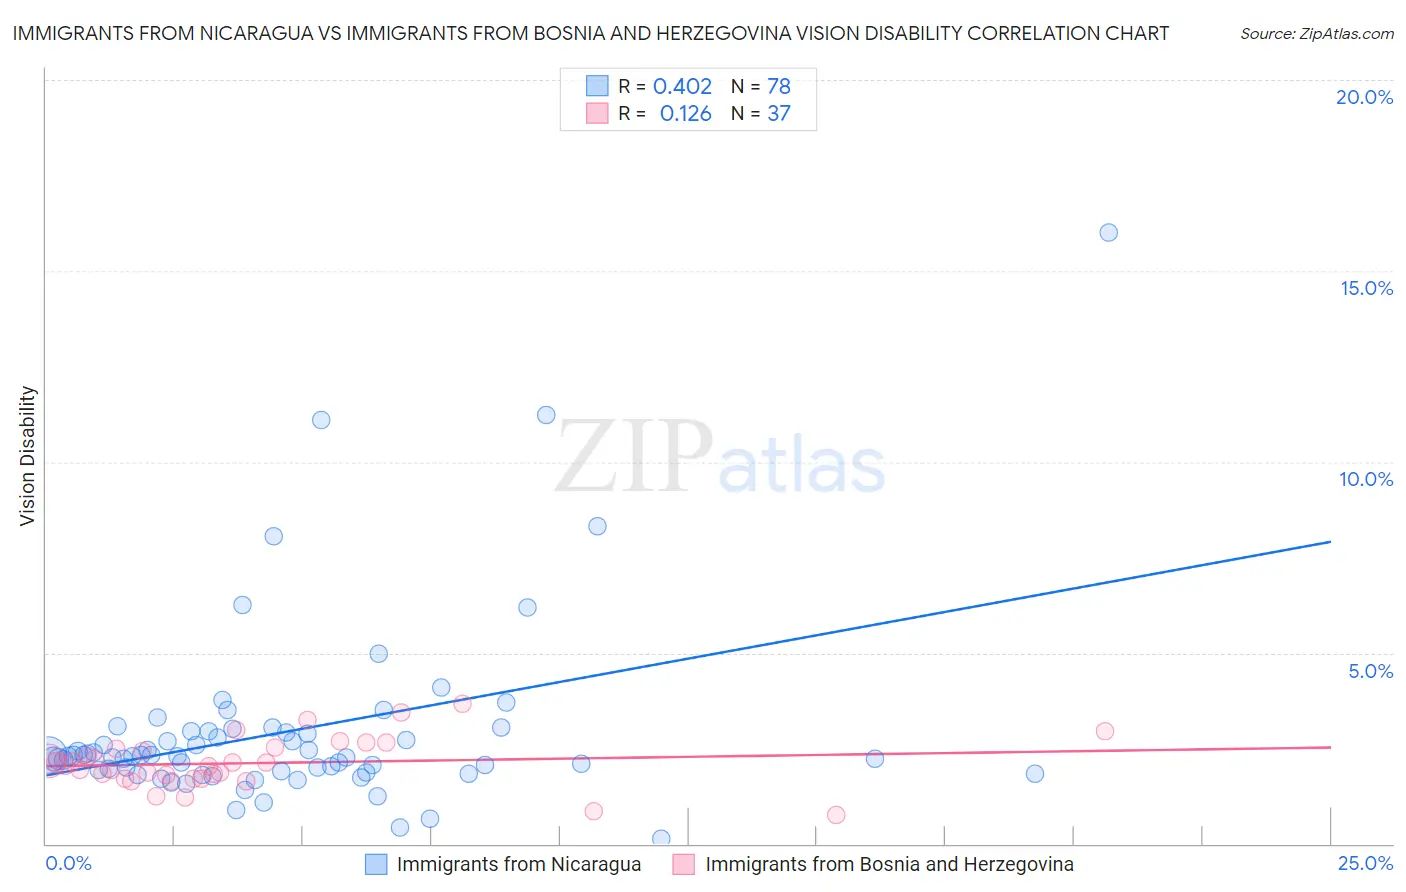 Immigrants from Nicaragua vs Immigrants from Bosnia and Herzegovina Vision Disability